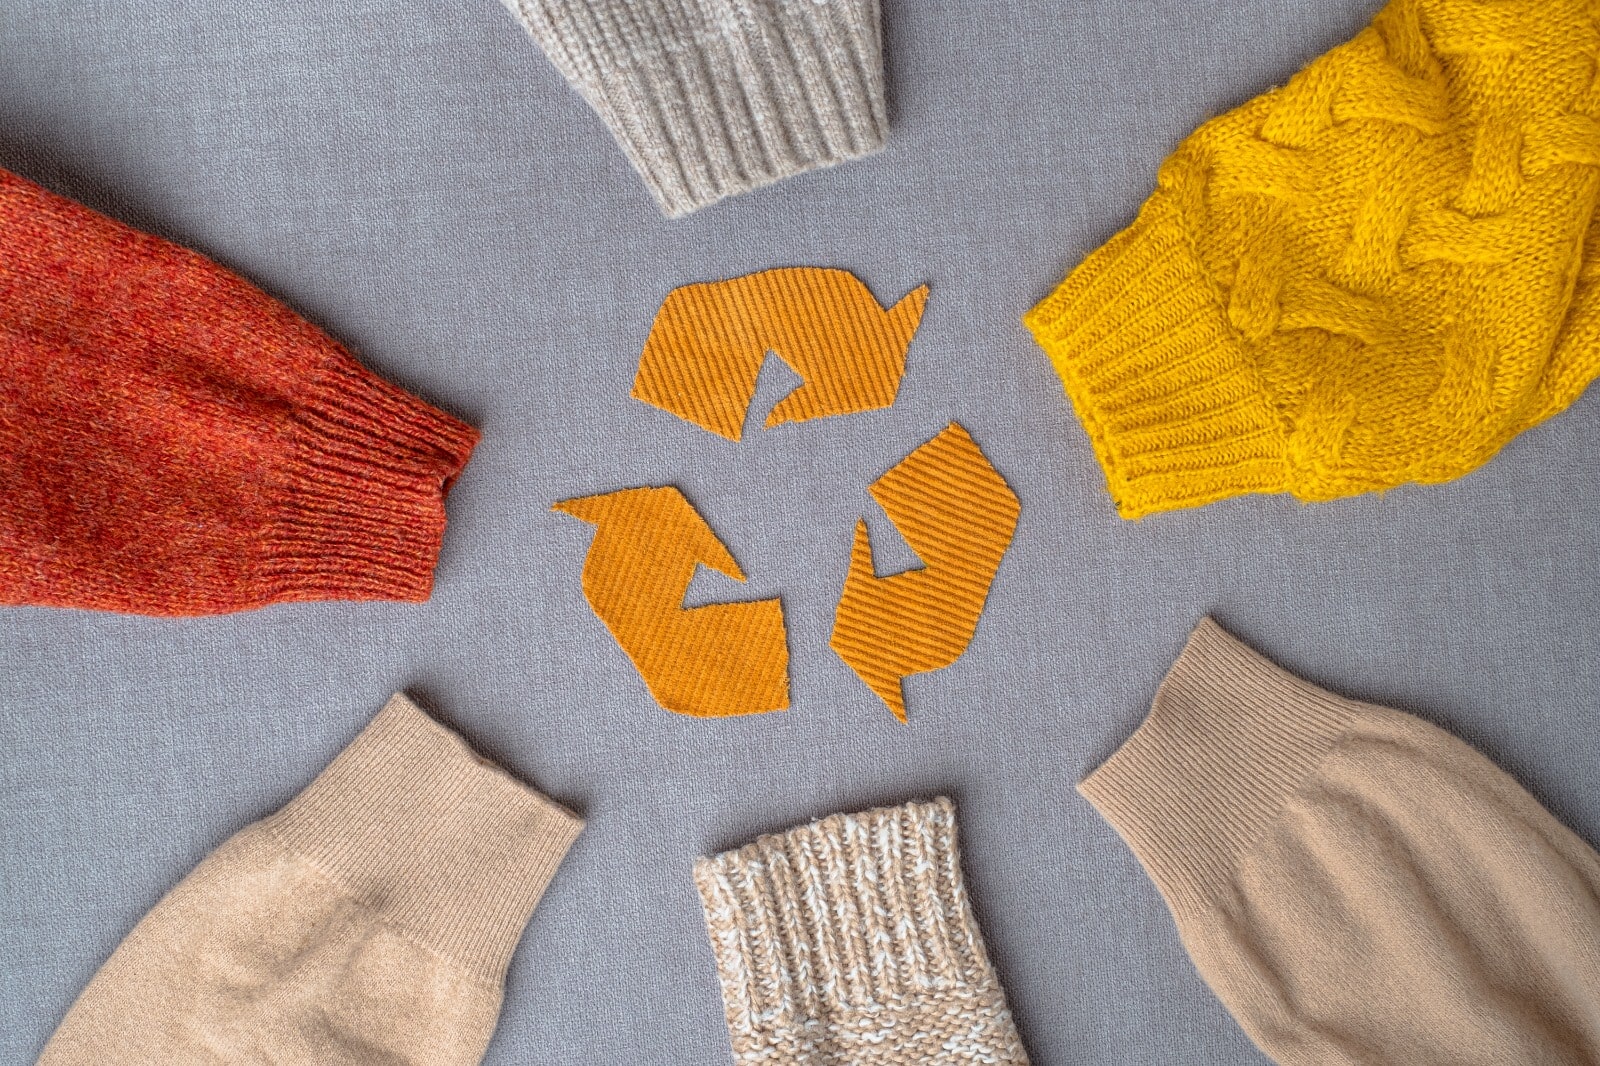 Recycled clothing